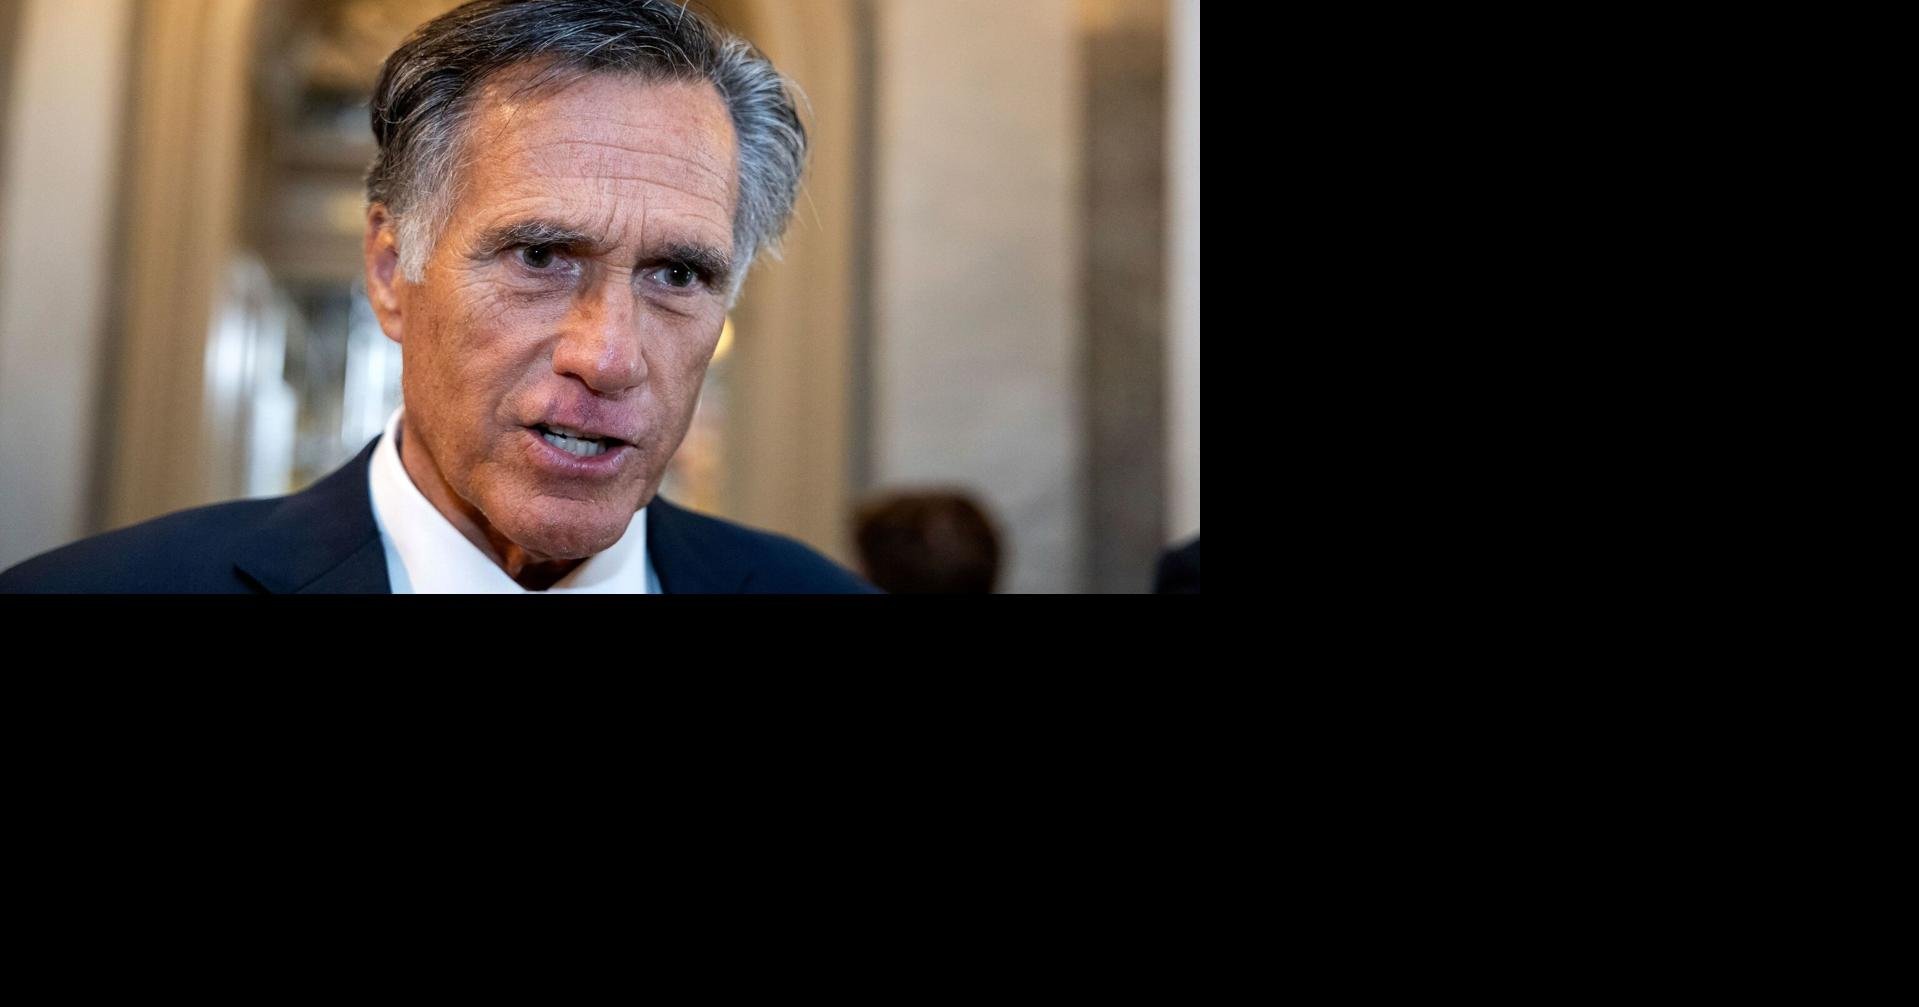 Mitt Romney Announces He Wont Seek Reelection As He Calls For ‘new Generation Of Leaders